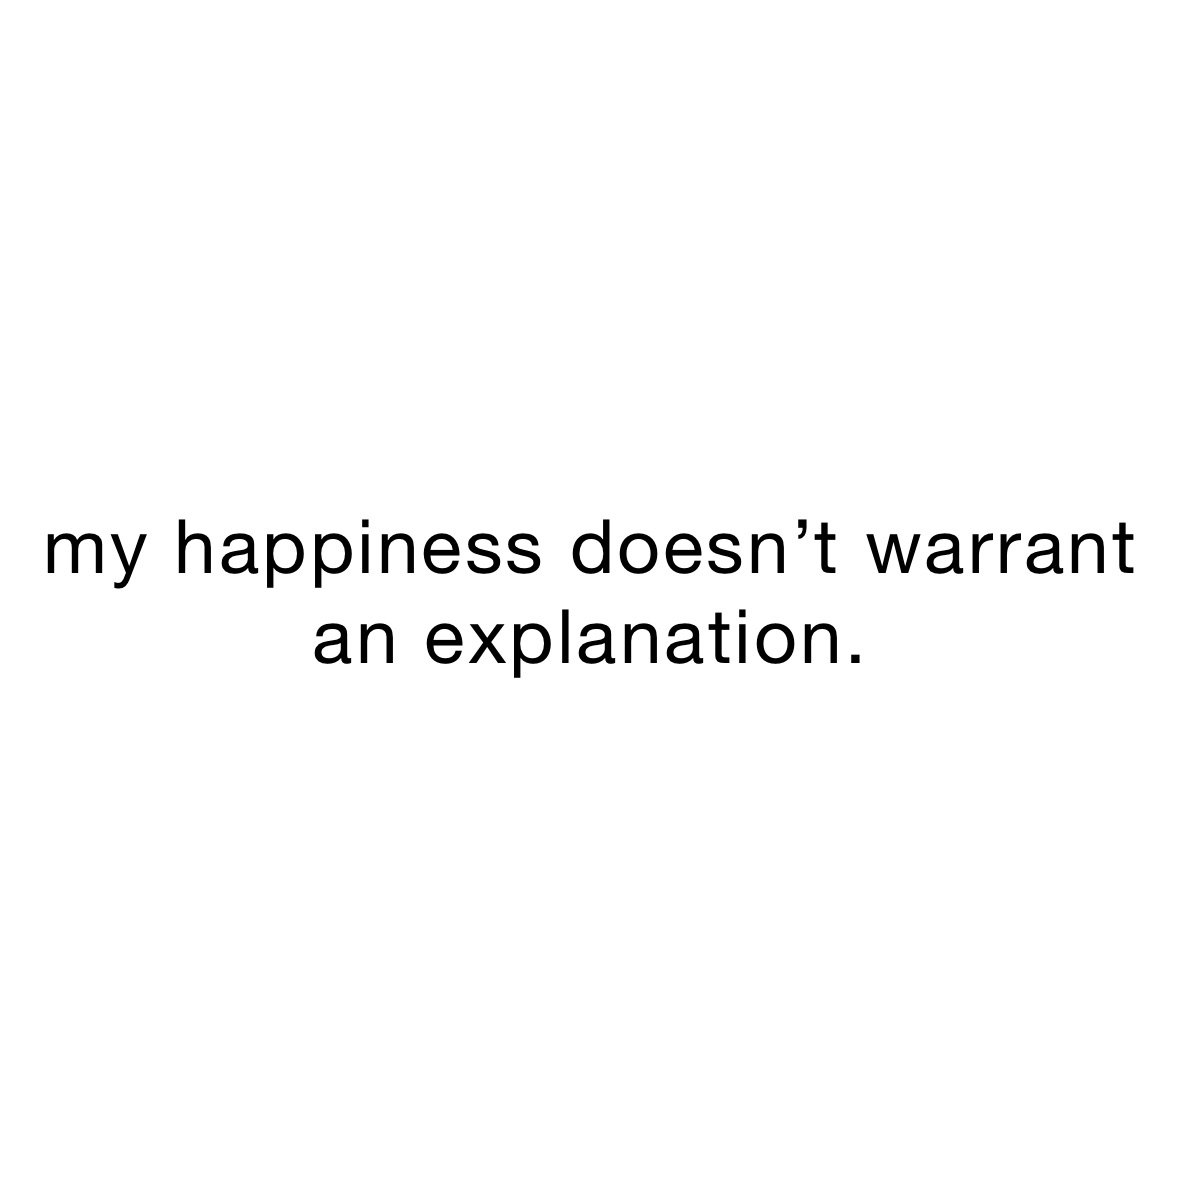 my happiness doesn’t warrant an explanation.